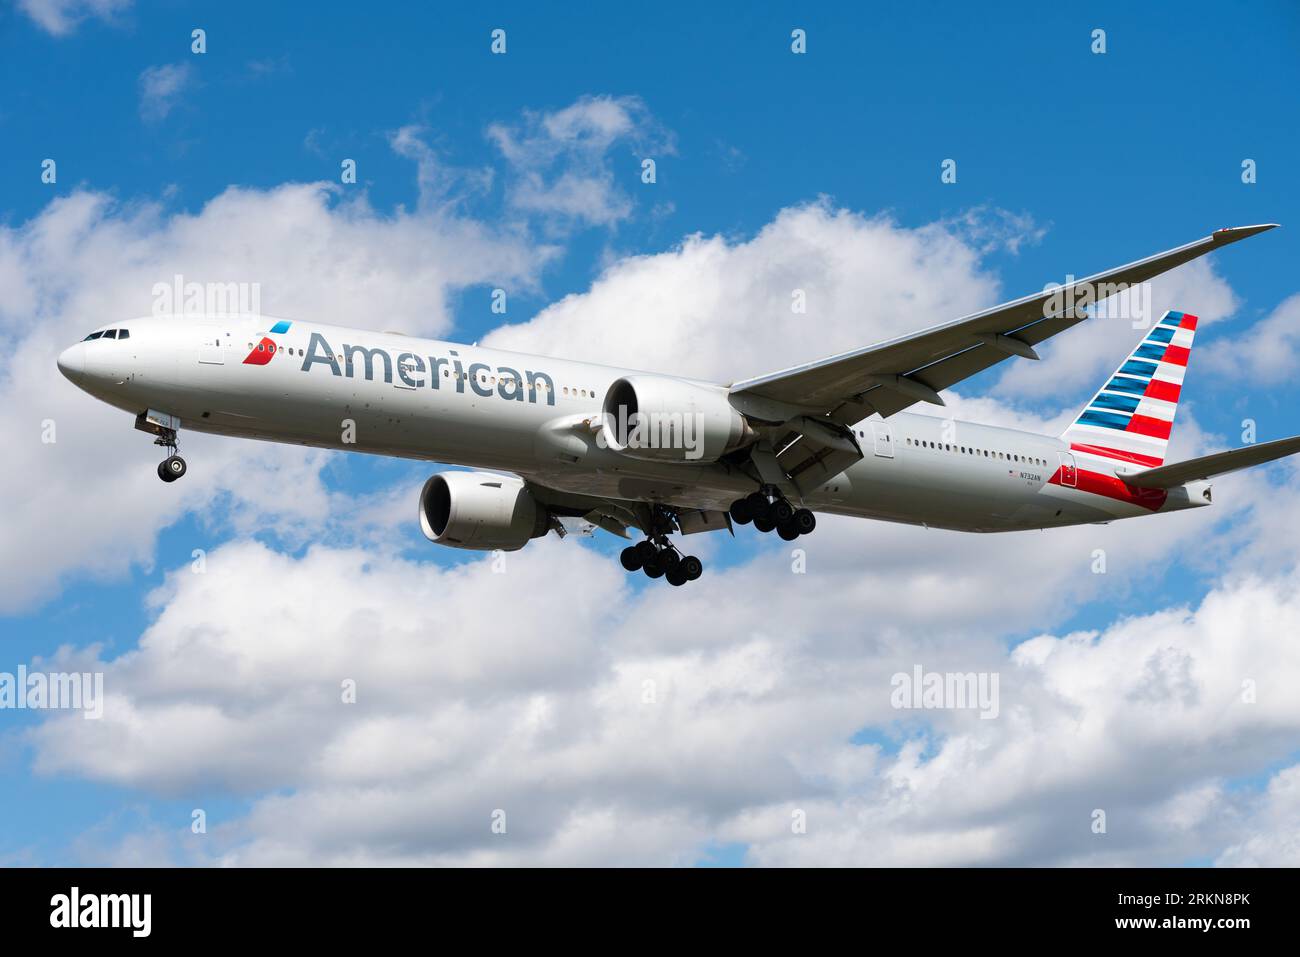 American Airlines Boeing 777-323/ER jet airliner plane N732AN on finals to land at London Heathrow Airport, UK. Long haul USA flight Stock Photo